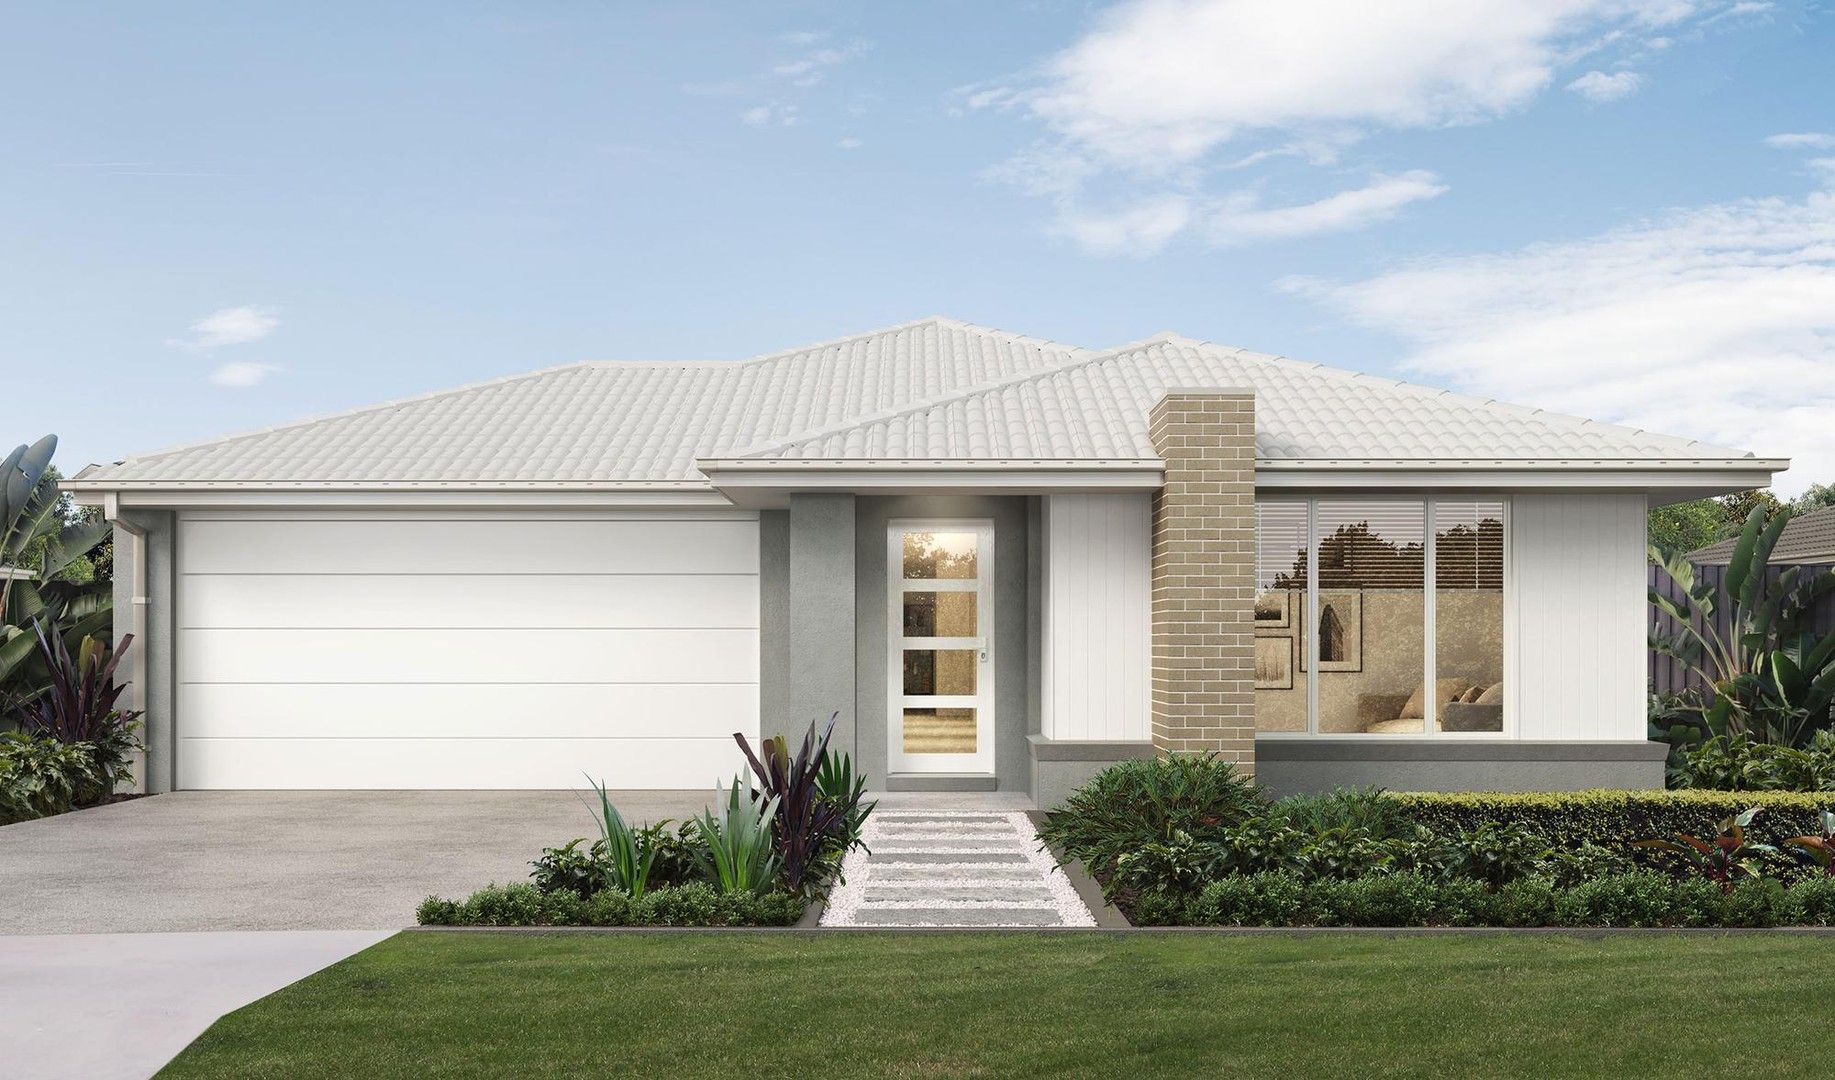 4 bedrooms New House & Land in 808 Higyed Road LOGAN RESERVE QLD, 4133